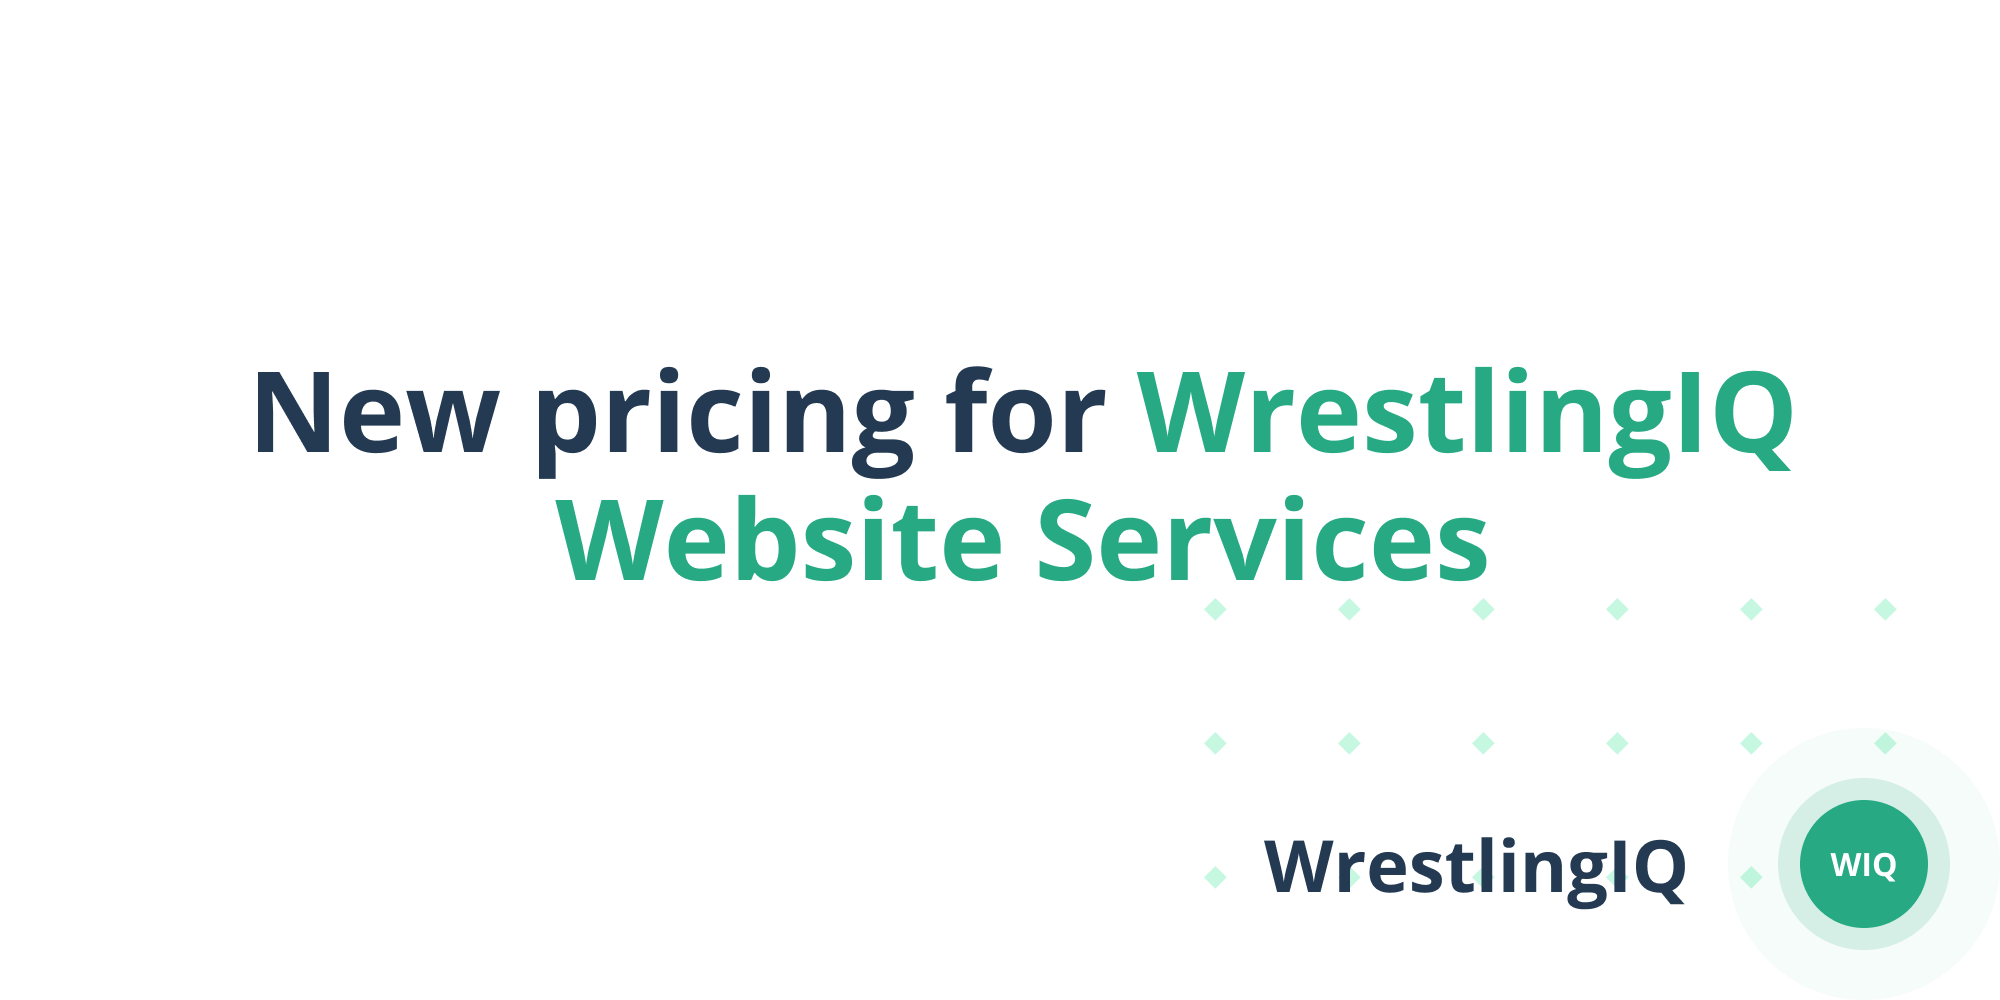 Website services pricing update